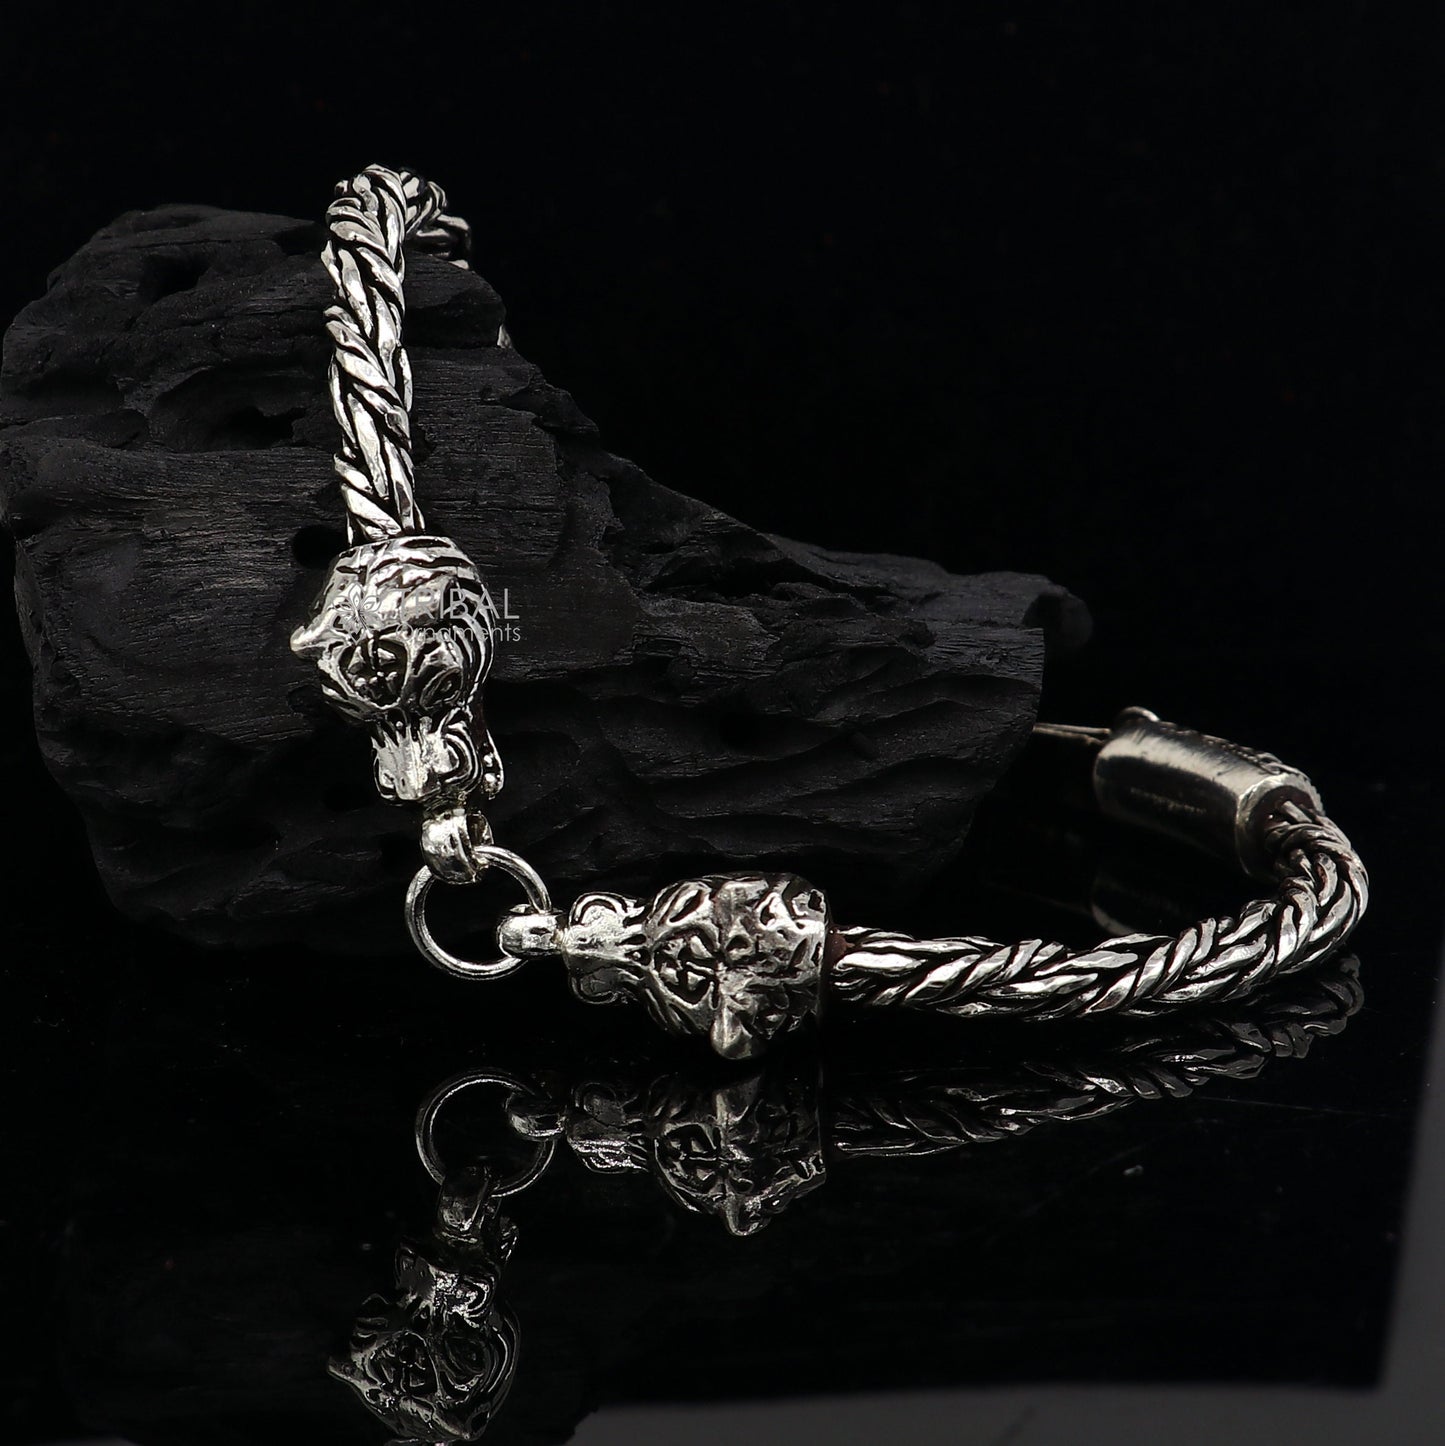 925 sterling silver Unique handmade chain solid bracelet with gorgeous lion face design antique stylish modern gifting jewelry sbr702 - TRIBAL ORNAMENTS